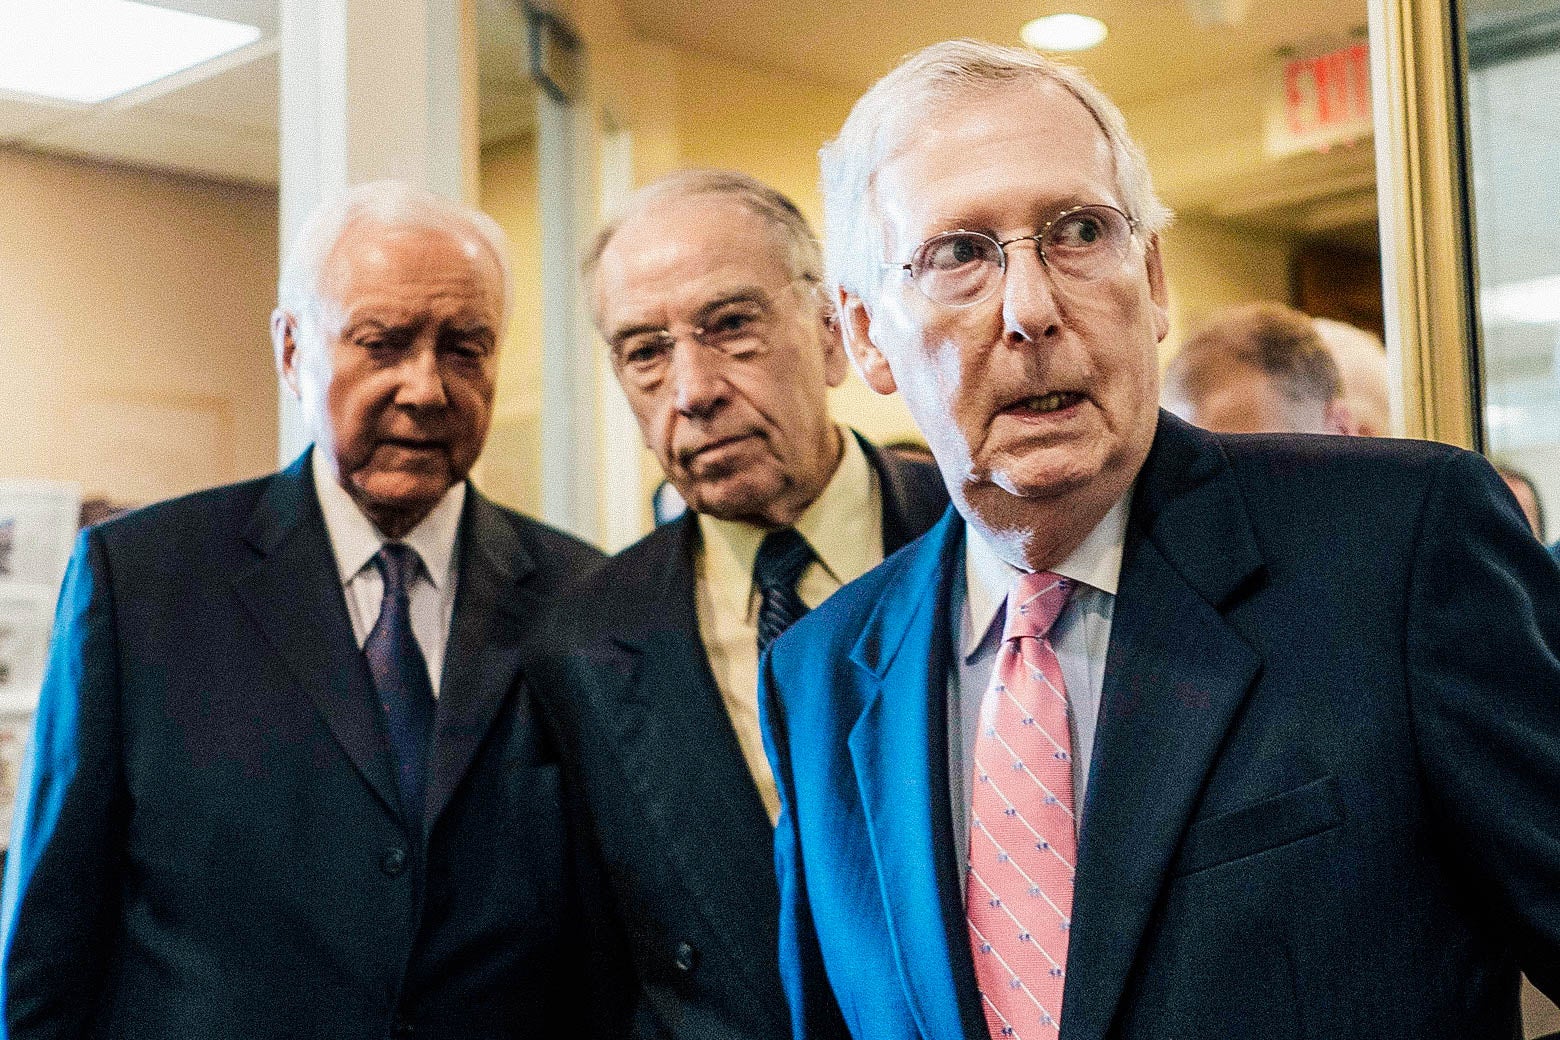 Hatch, Grassley, and McConnell pictured before beginning a press conference.